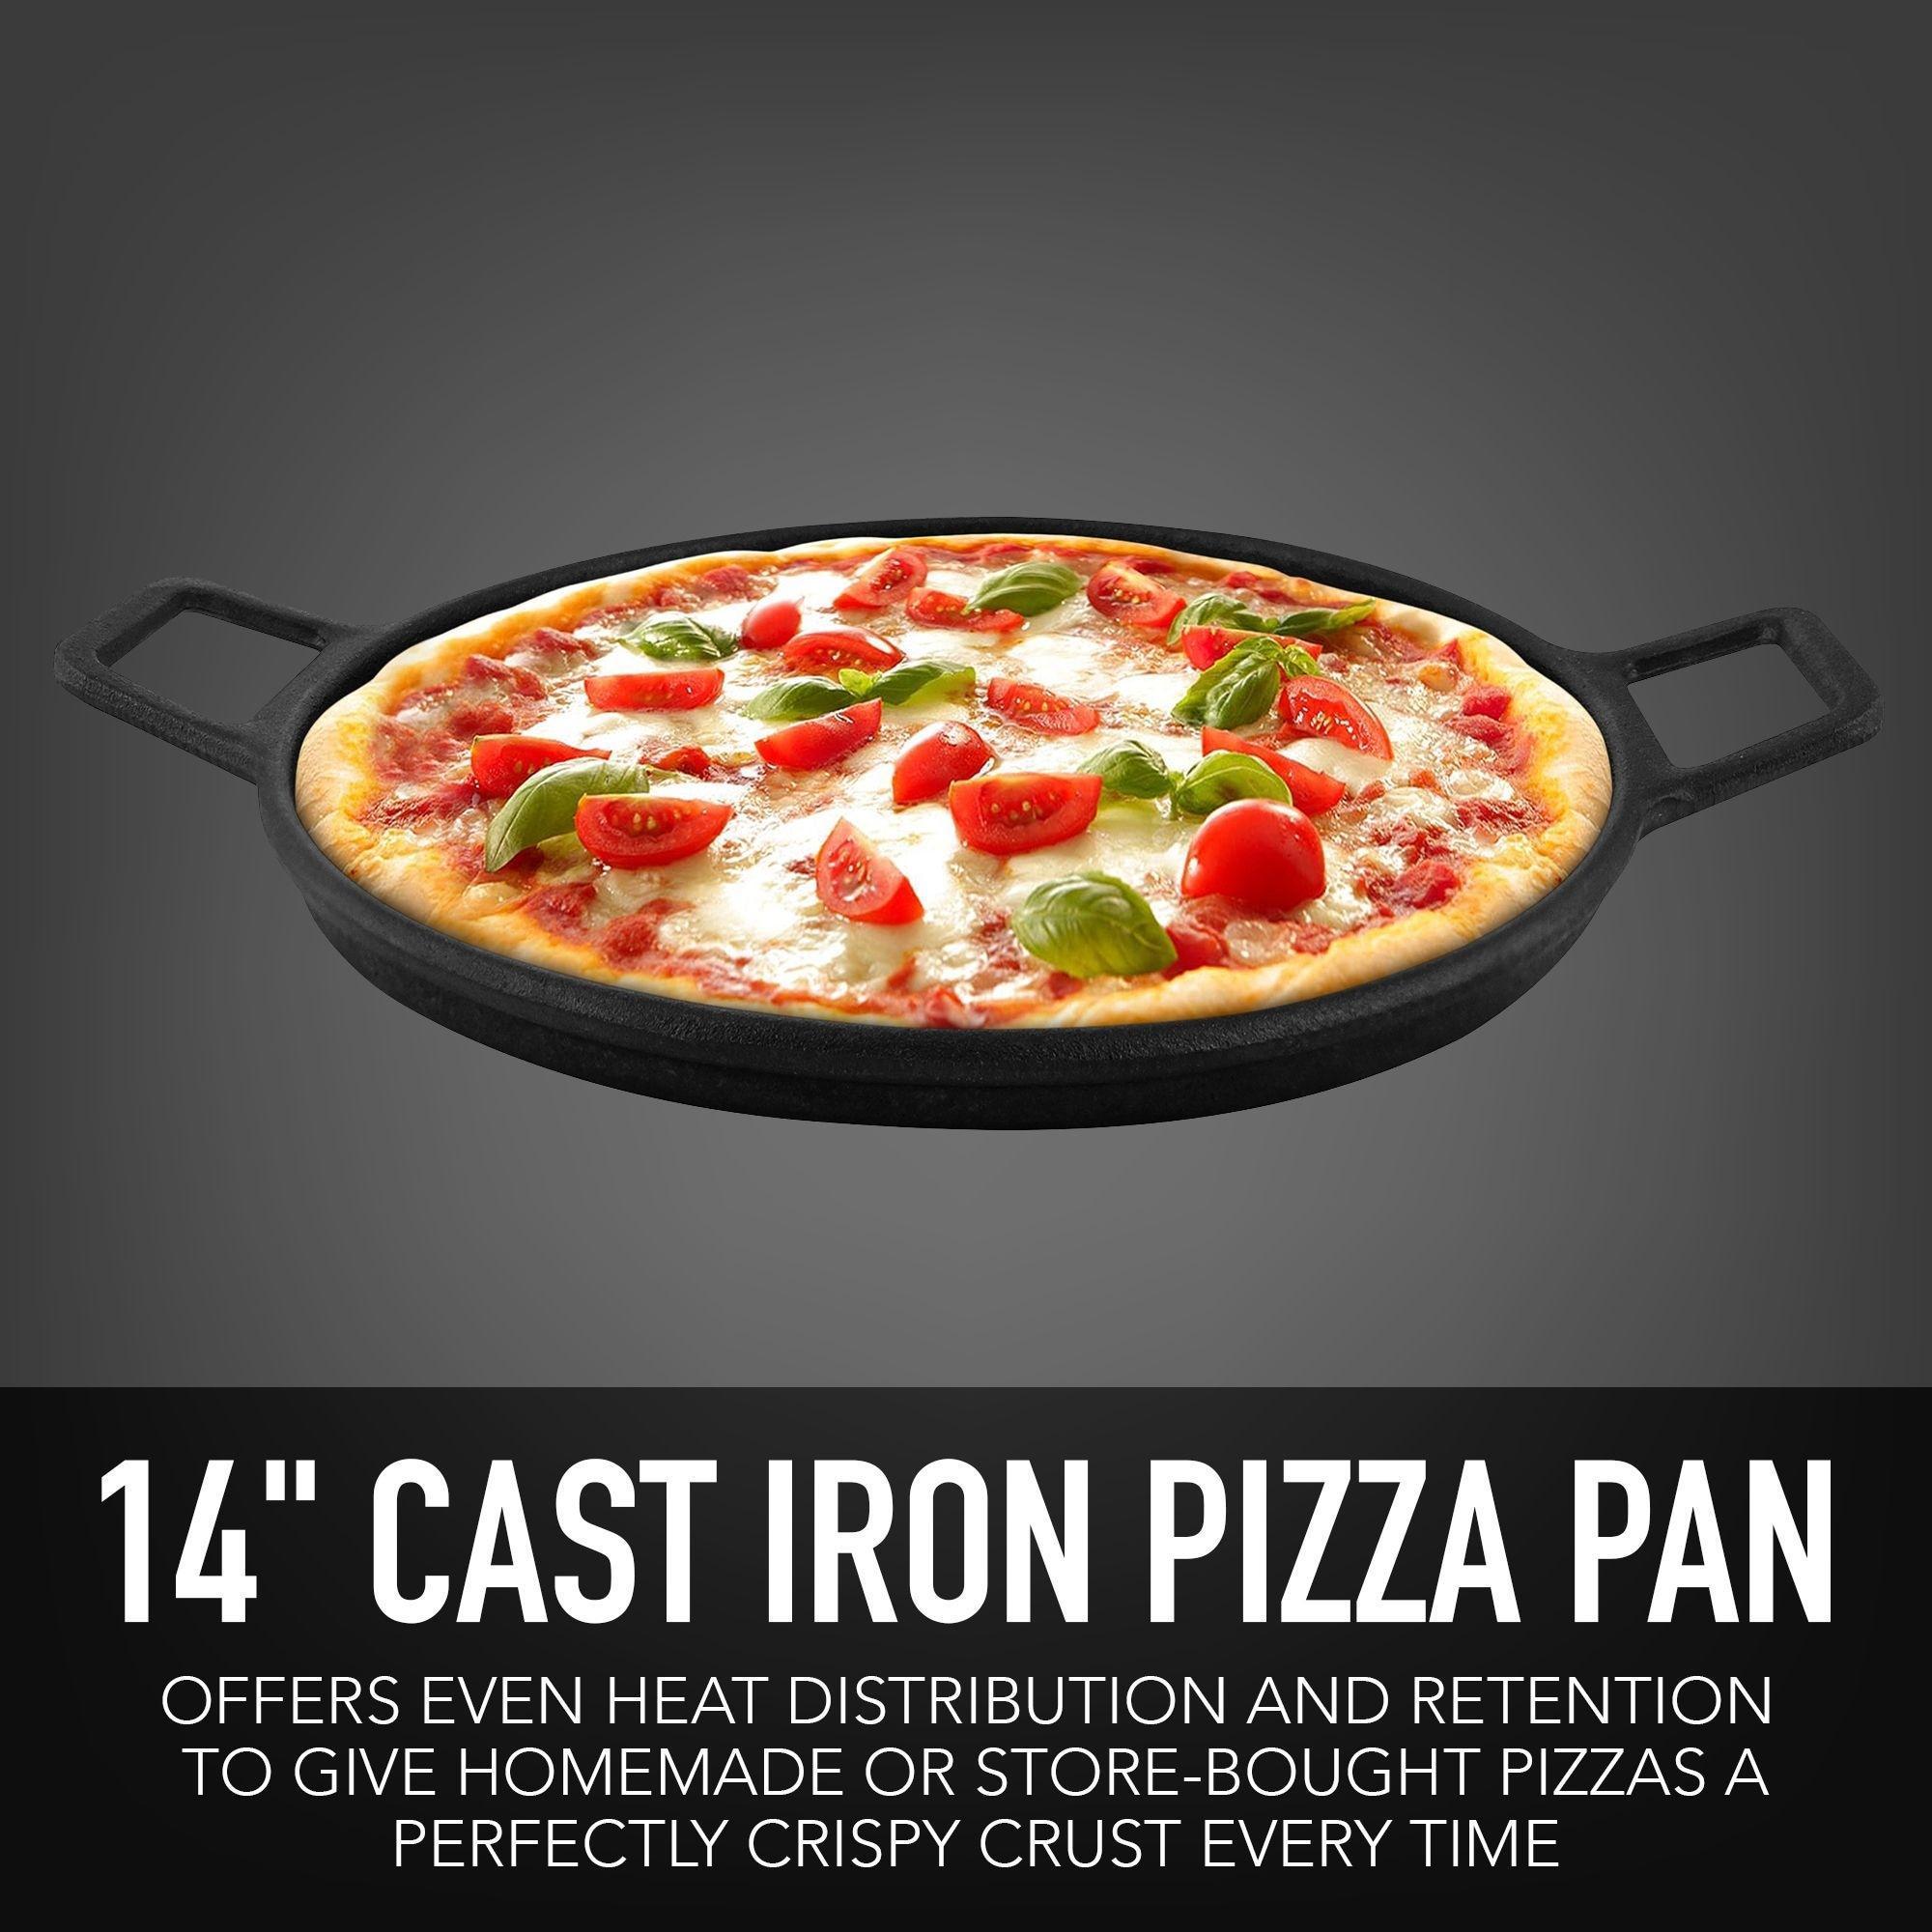 Best Place To buy Kenmore 14" Cast Iron Pizza Pan